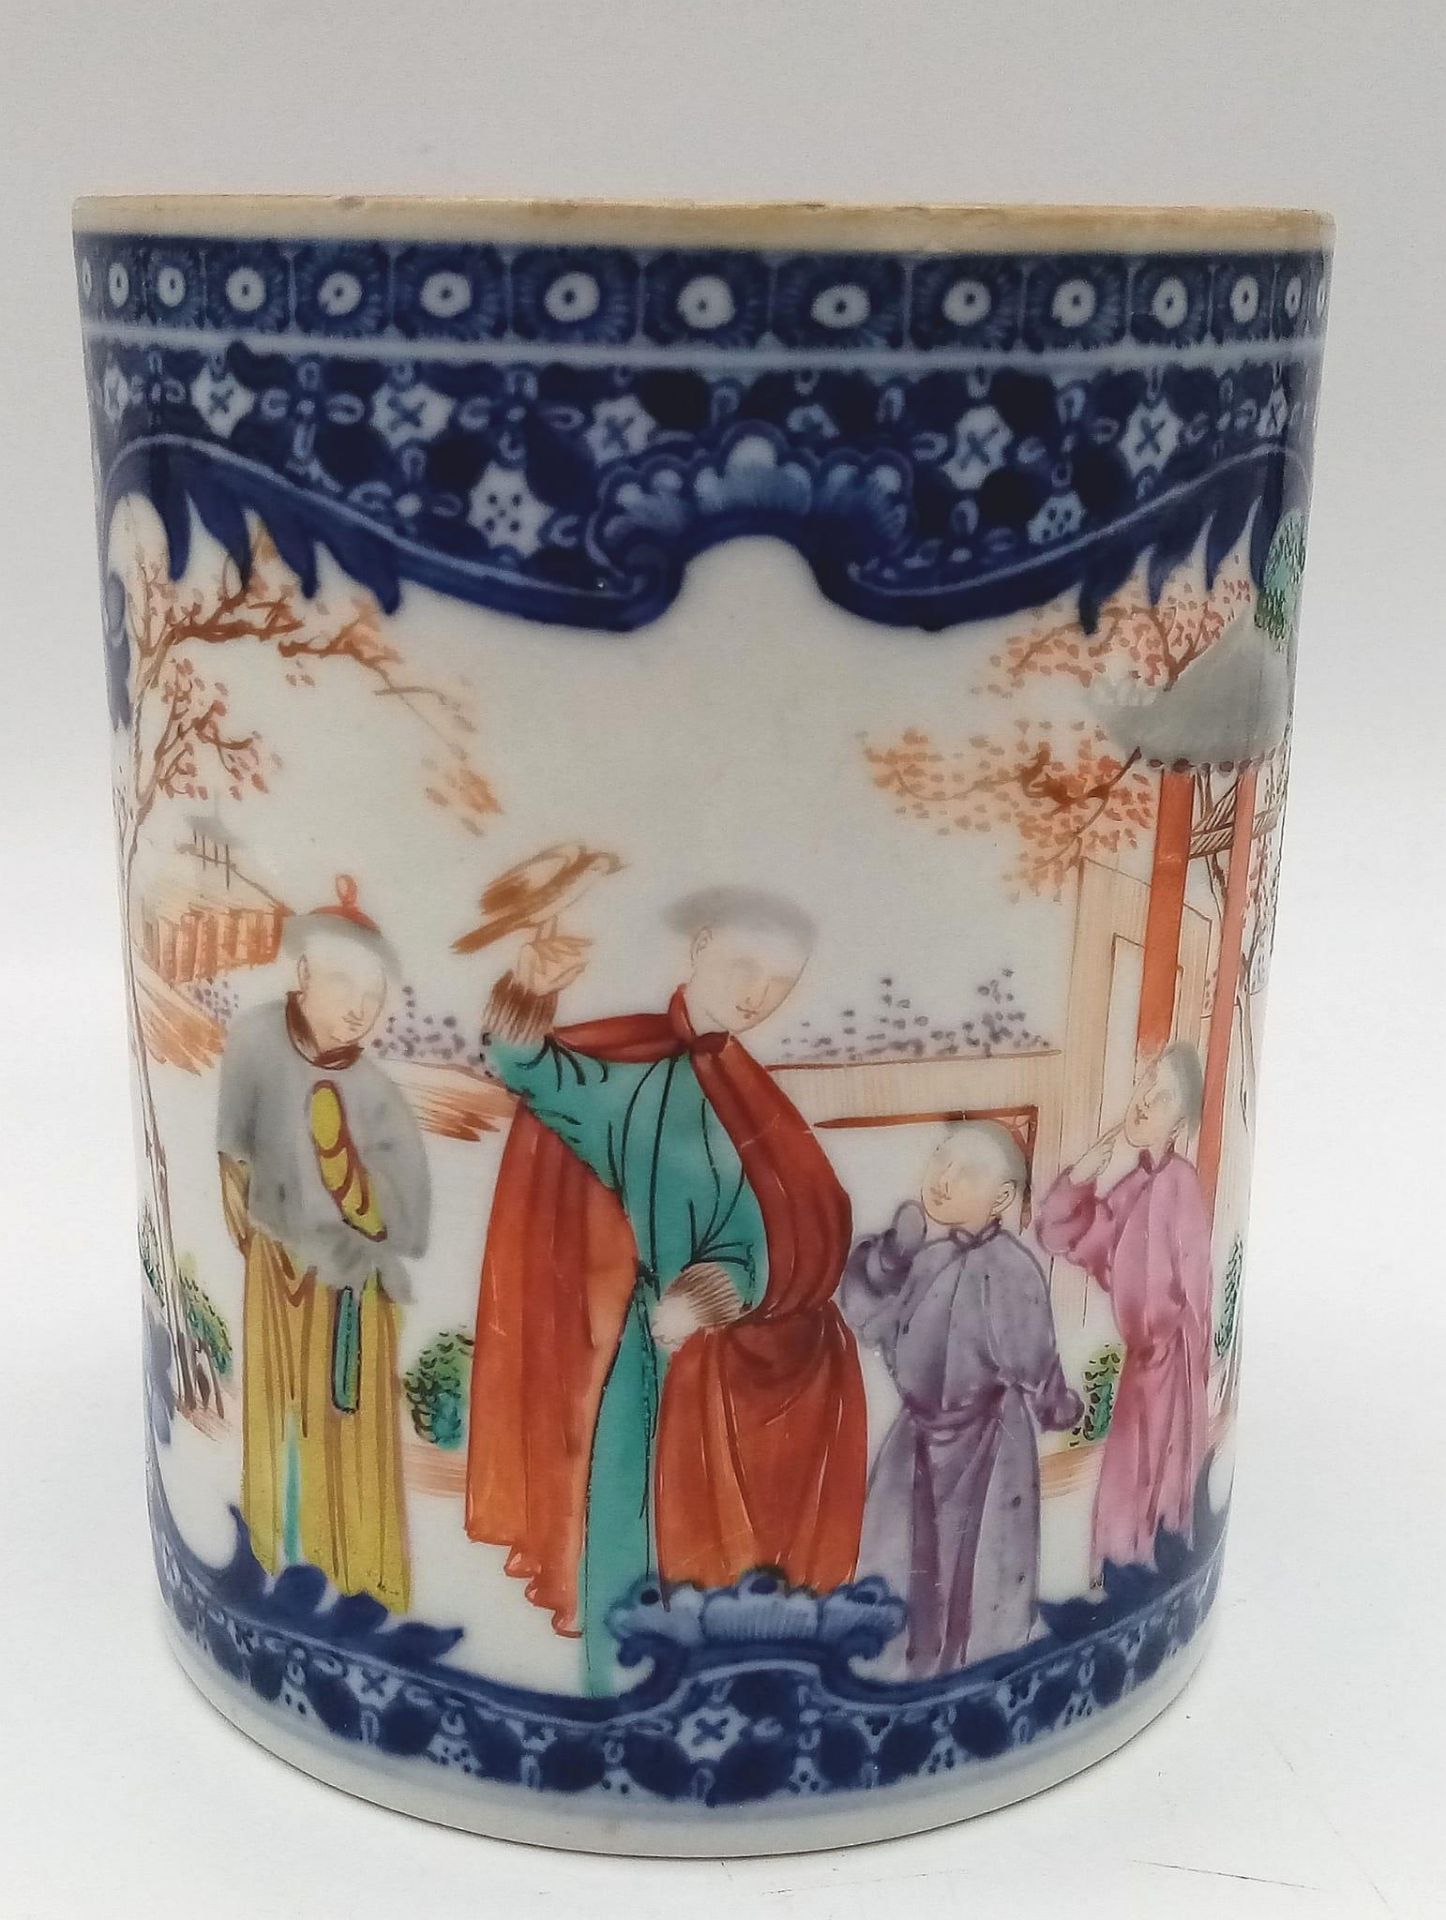 A large Antique 18th Century Chinese Hand-Painted Famille Rose mug - with a family garden scene. - Image 2 of 5